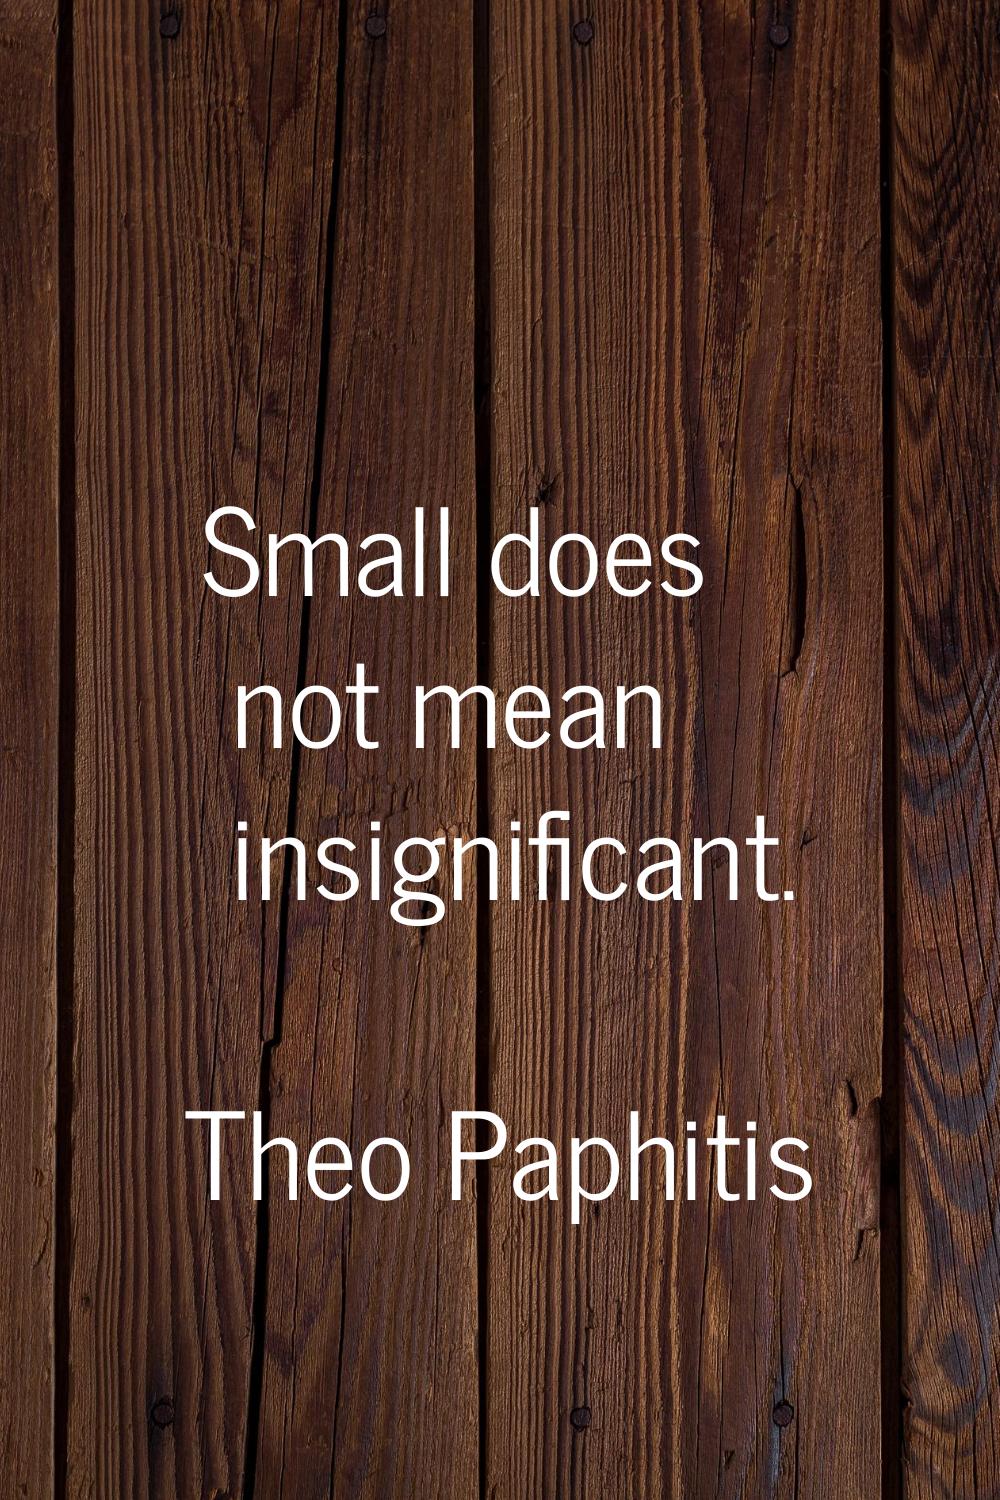 Small does not mean insignificant.